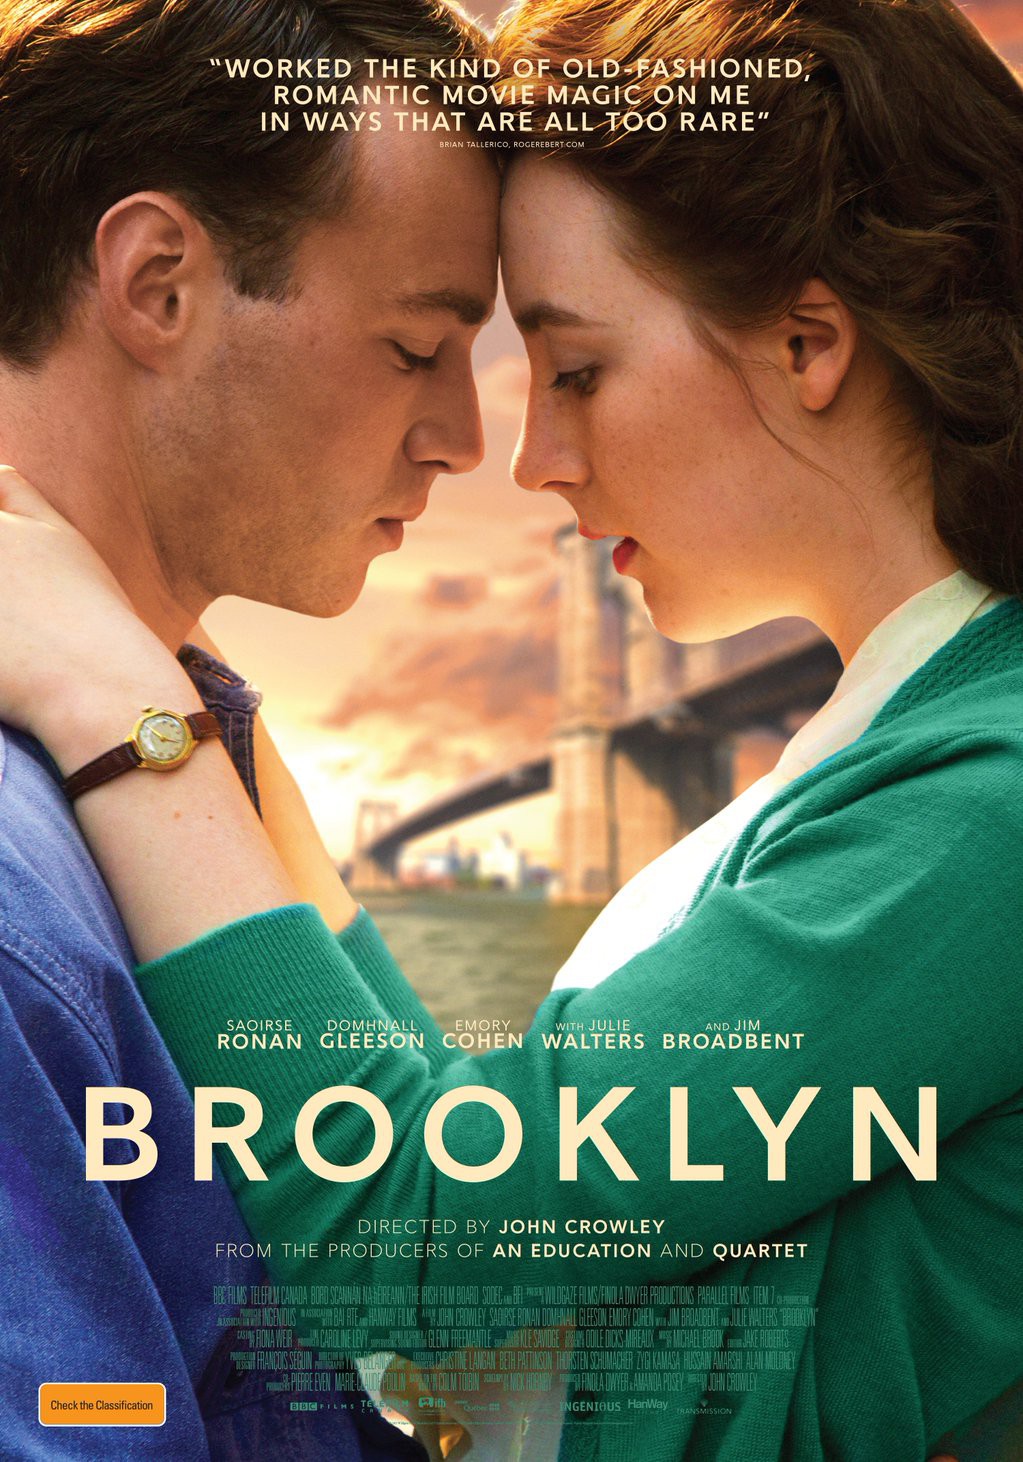 http://vignette2.wikia.nocookie.net/scratchpad/images/1/15/2015_-_Brooklyn_Movie_Poster.jpg/revision/latest?cb=20151124182610